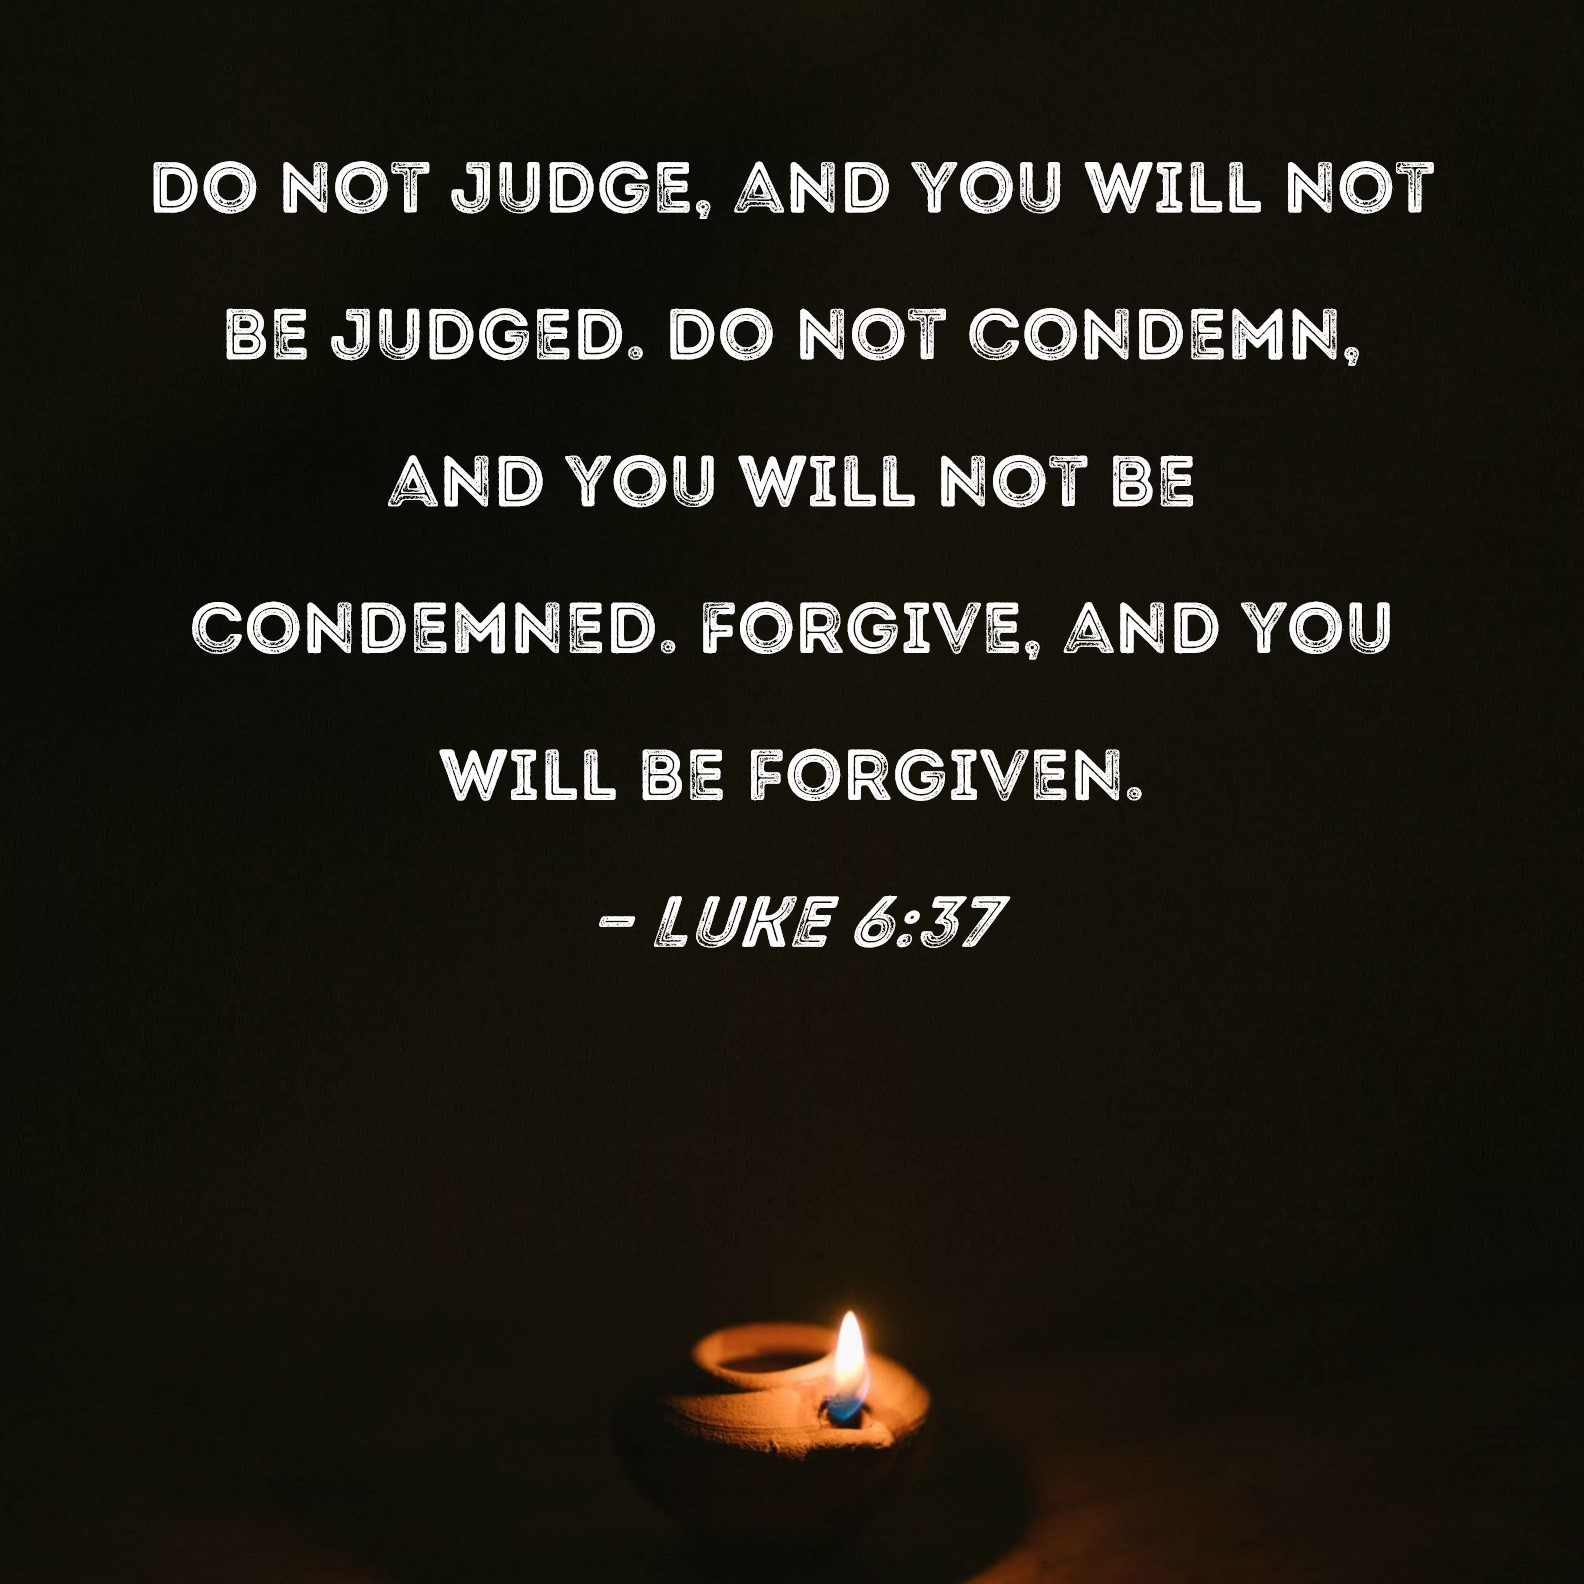 bible judge not lest ye be judged